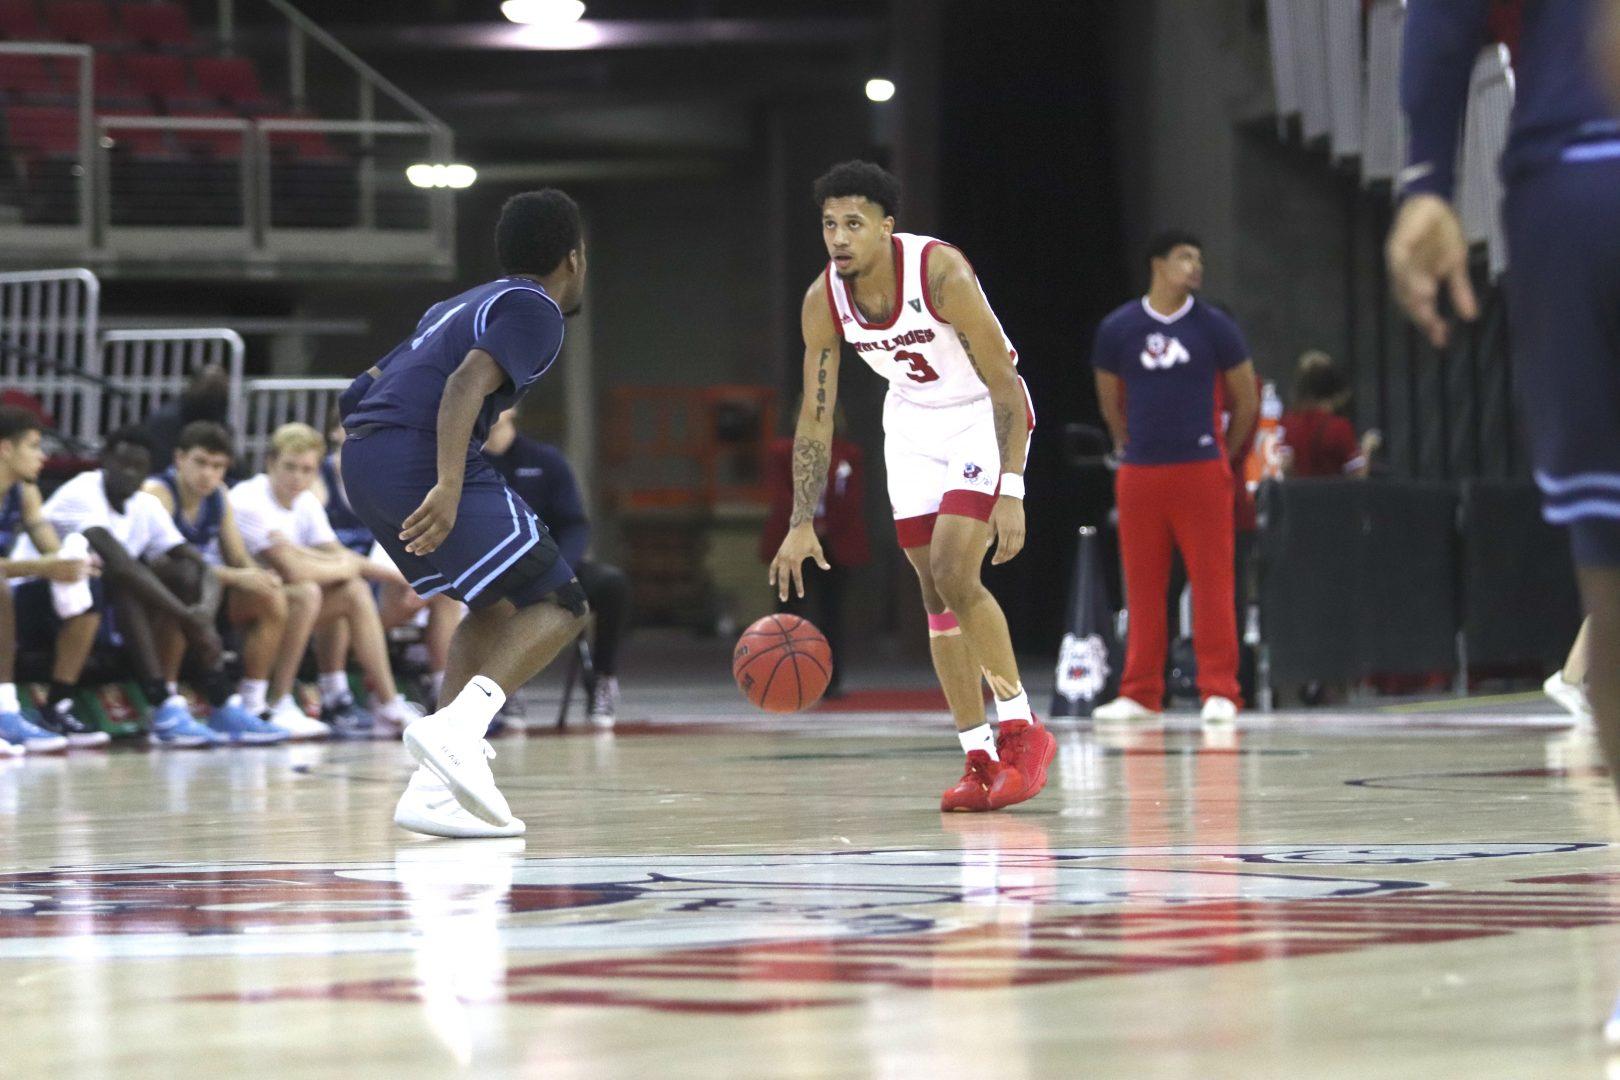 Fresno State guard Isaiah Hill starts an offensive play against San Diego on Wednesday, Dec. 1, 2021, at Save Mart Center. (Melina Kazanjian/The Collegian)